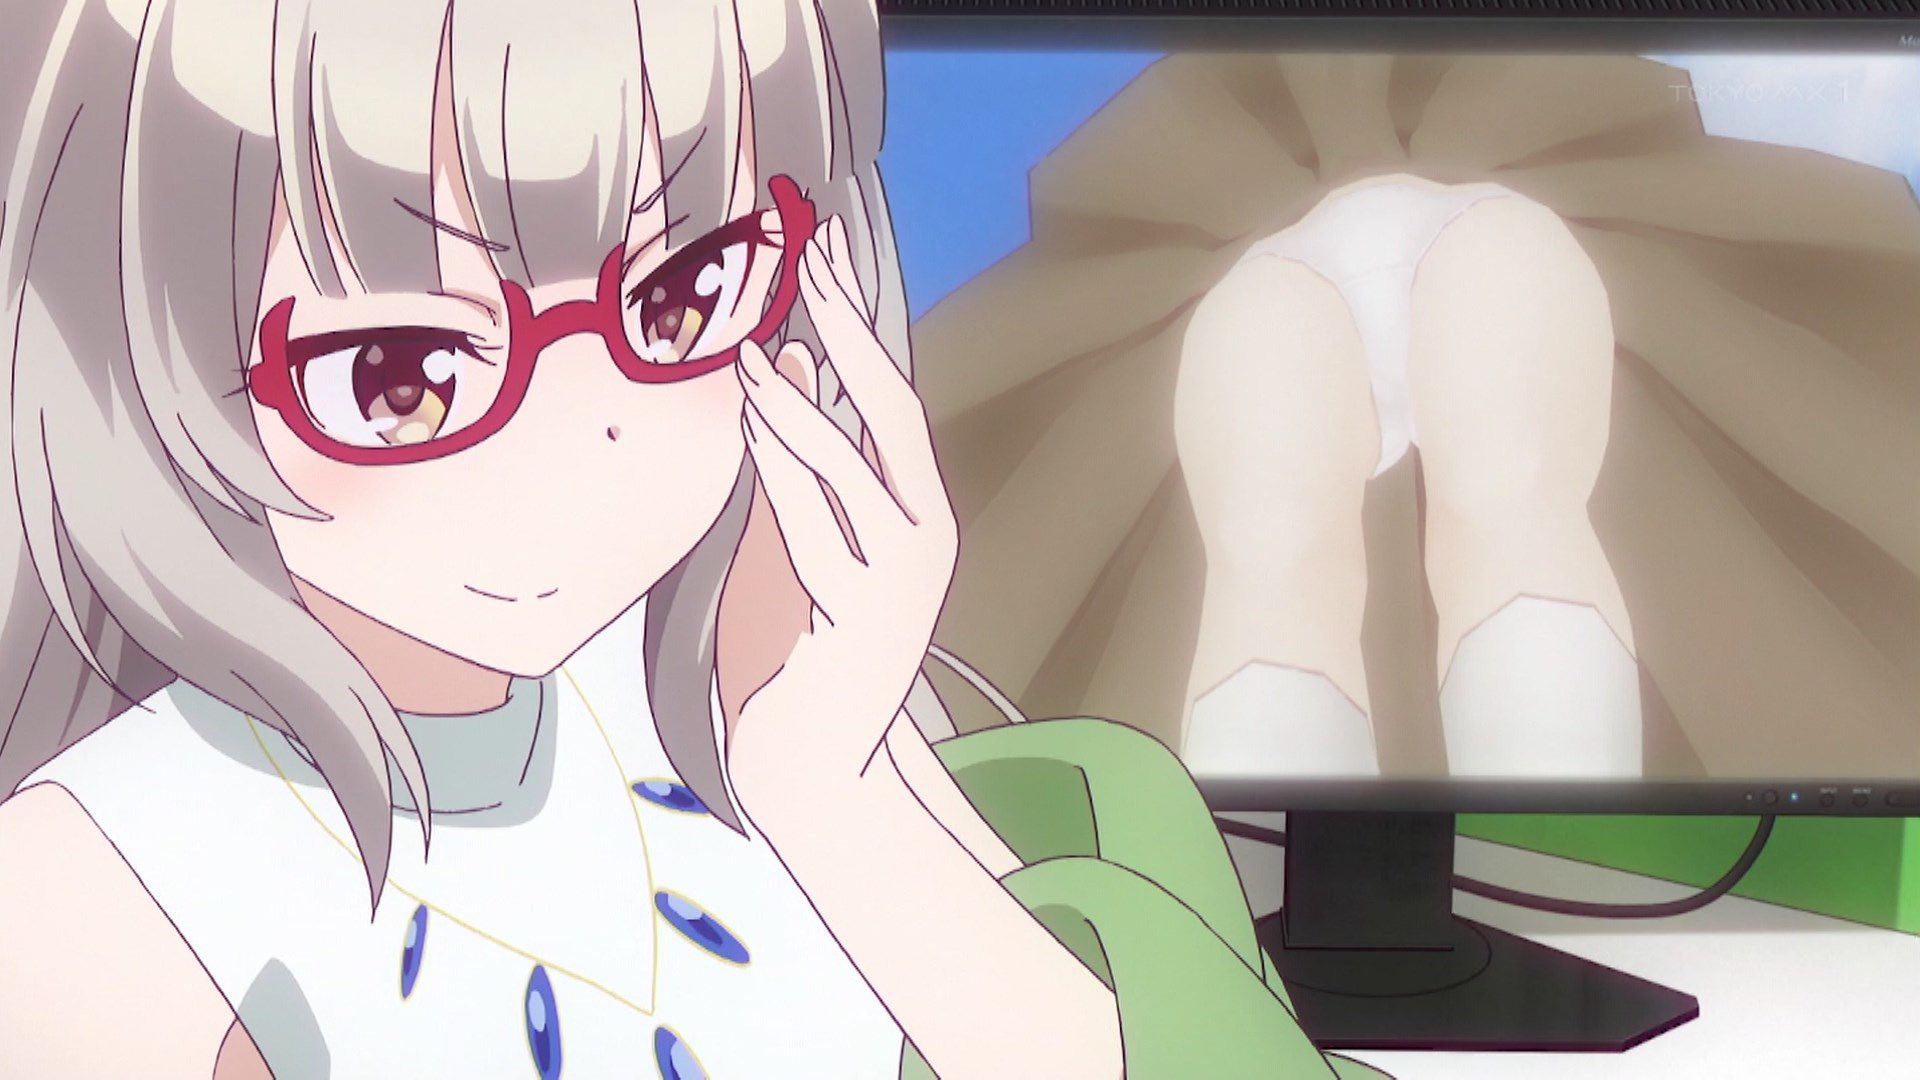 [Artificial mouth times] "NEW GAME! "Of all nine episodes, Yuri hifumi nude too たまらな of wwwwwwwww 4